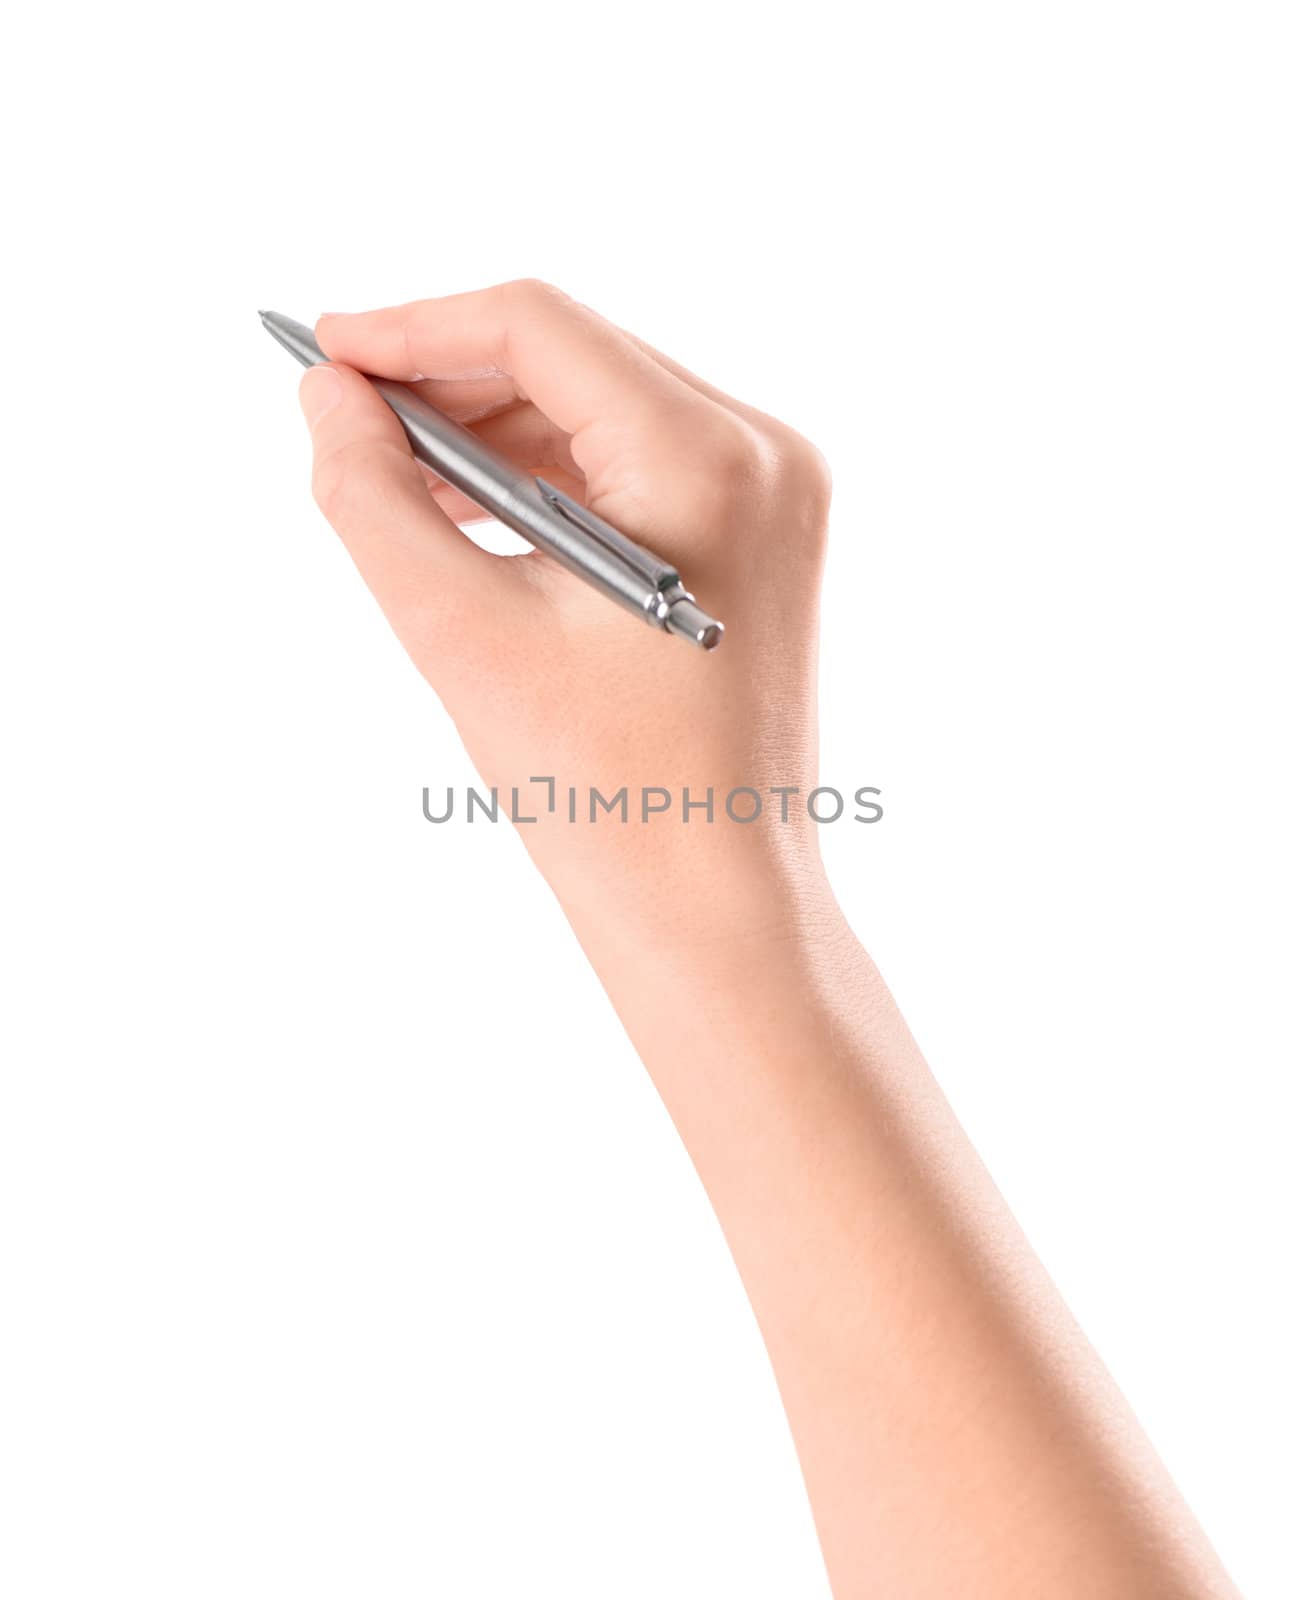 Close up of women arm writing with metallic pen. Isolated on white background.